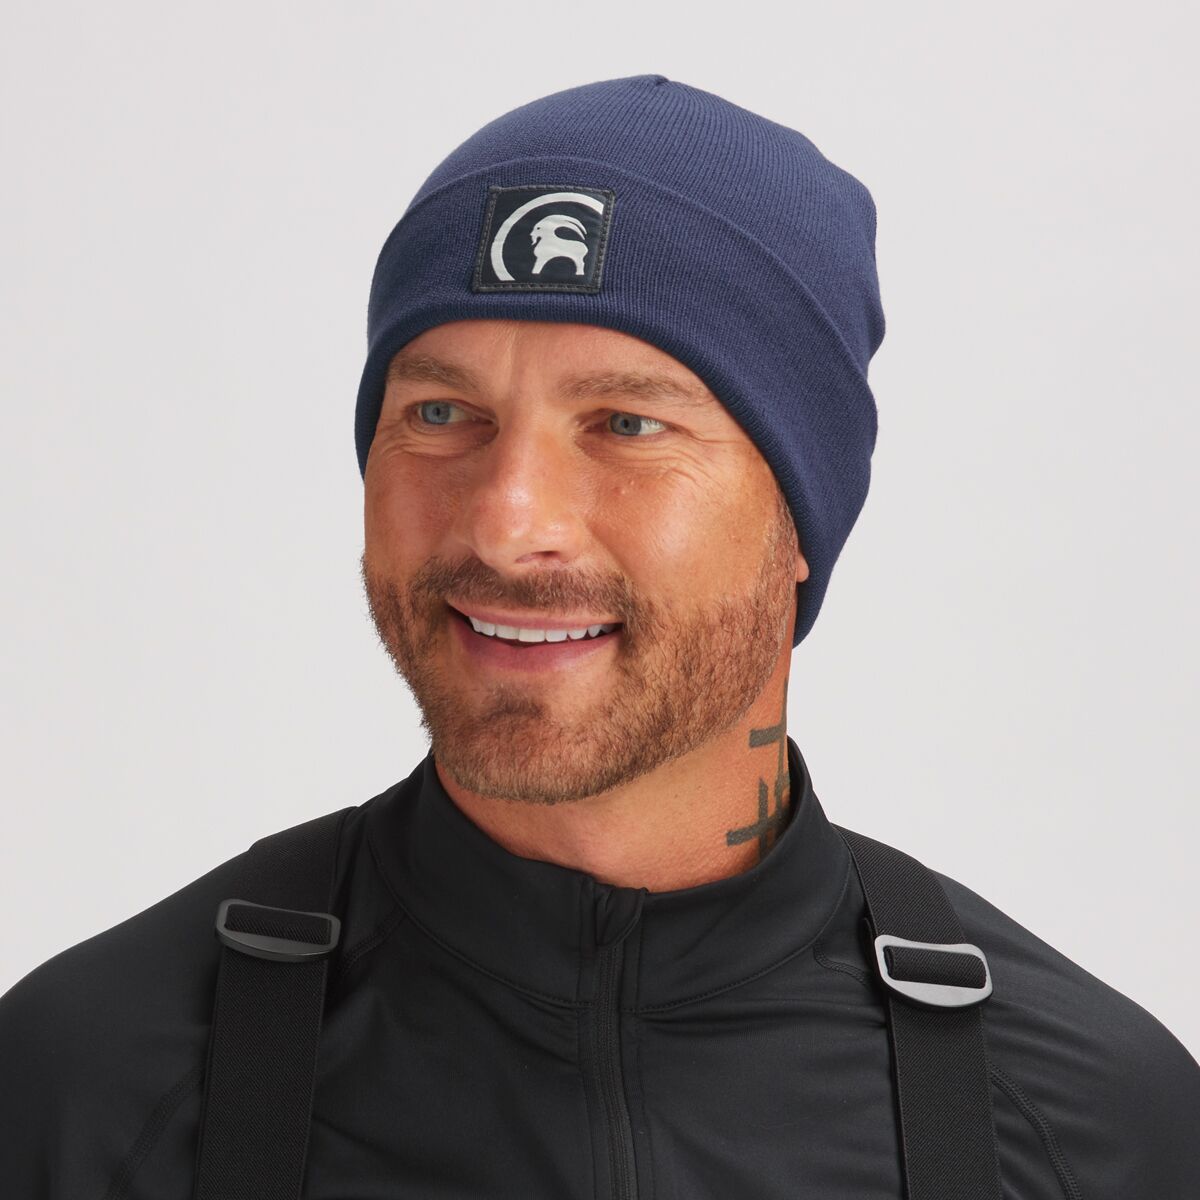 Backcountry Crop Goat Beanie - Accessories